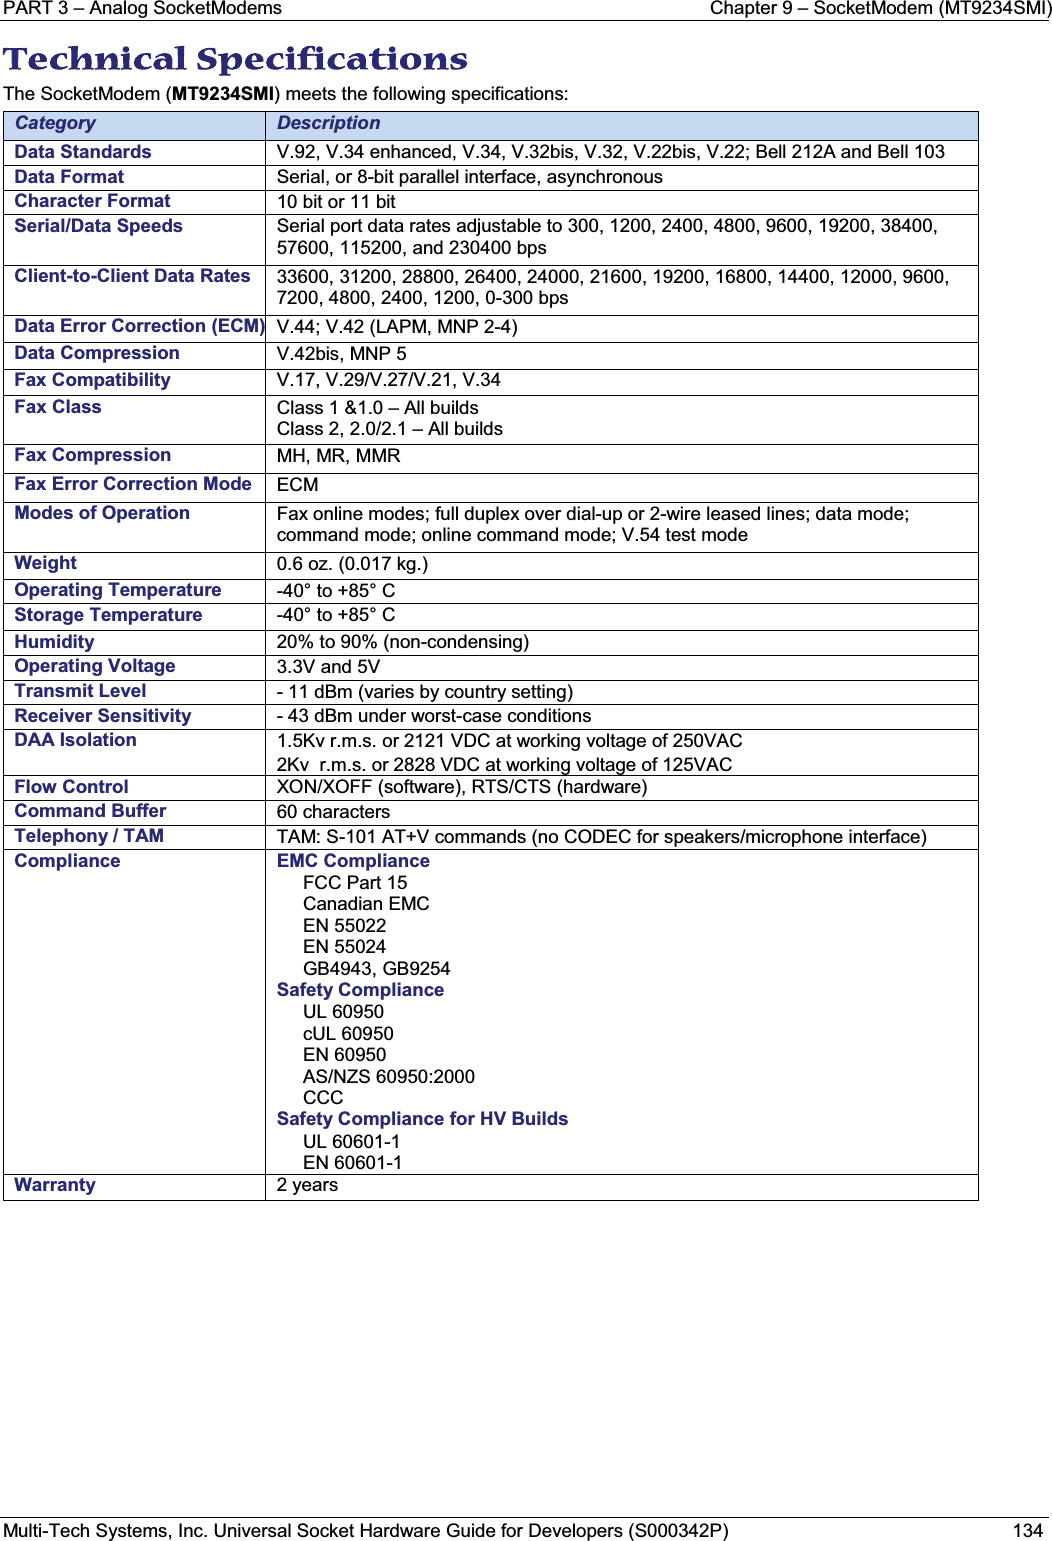 PART 3 – Analog SocketModems Chapter 9 – SocketModem (MT9234SMI)Multi-Tech Systems, Inc. Universal Socket Hardware Guide for Developers (S000342P) 134TTechnical Specifications  The SocketModem (MT9234SMI) meets the following specifications:Category DescriptionData Standards V.92, V.34 enhanced, V.34, V.32bis, V.32, V.22bis, V.22; Bell 212A and Bell 103Data Format Serial, or 8-bit parallel interface, asynchronousCharacter Format 10 bit or 11 bitSerial/Data Speeds  Serial port data rates adjustable to 300, 1200, 2400, 4800, 9600, 19200, 38400, 57600, 115200, and 230400 bpsClient-to-Client Data Rates 33600, 31200, 28800, 26400, 24000, 21600, 19200, 16800, 14400, 12000, 9600, 7200, 4800, 2400, 1200, 0-300 bpsData Error Correction (ECM) V.44; V.42 (LAPM, MNP 2-4)Data Compression V.42bis, MNP 5Fax Compatibility V.17, V.29/V.27/V.21, V.34 Fax Class Class 1 &amp;1.0 – All buildsClass 2, 2.0/2.1 – All buildsFax Compression MH, MR, MMR Fax Error Correction Mode ECMModes of Operation Fax online modes; full duplex over dial-up or 2-wire leased lines; data mode; command mode; online command mode; V.54 test modeWeight 0.6 oz. (0.017 kg.) Operating Temperature  -40° to +85° C  Storage Temperature -40° to +85° C   Humidity 20% to 90% (non-condensing)Operating Voltage 3.3V and 5VTransmit Level - 11 dBm (varies by country setting)Receiver Sensitivity - 43 dBm under worst-case conditionsDAA Isolation  1.5Kv r.m.s. or 2121 VDC at working voltage of 250VAC2Kv  r.m.s. or 2828 VDC at working voltage of 125VACFlow Control XON/XOFF (software), RTS/CTS (hardware)Command Buffer 60 charactersTelephony / TAM   TAM: S-101 AT+V commands (no CODEC for speakers/microphone interface)Compliance EMC ComplianceFCC Part 15 Canadian EMCEN 55022 EN 55024GB4943, GB9254Safety ComplianceUL 60950cUL 60950EN 60950AS/NZS 60950:2000 CCCSafety Compliance for HV BuildsUL 60601-1EN 60601-1Warranty  2 years